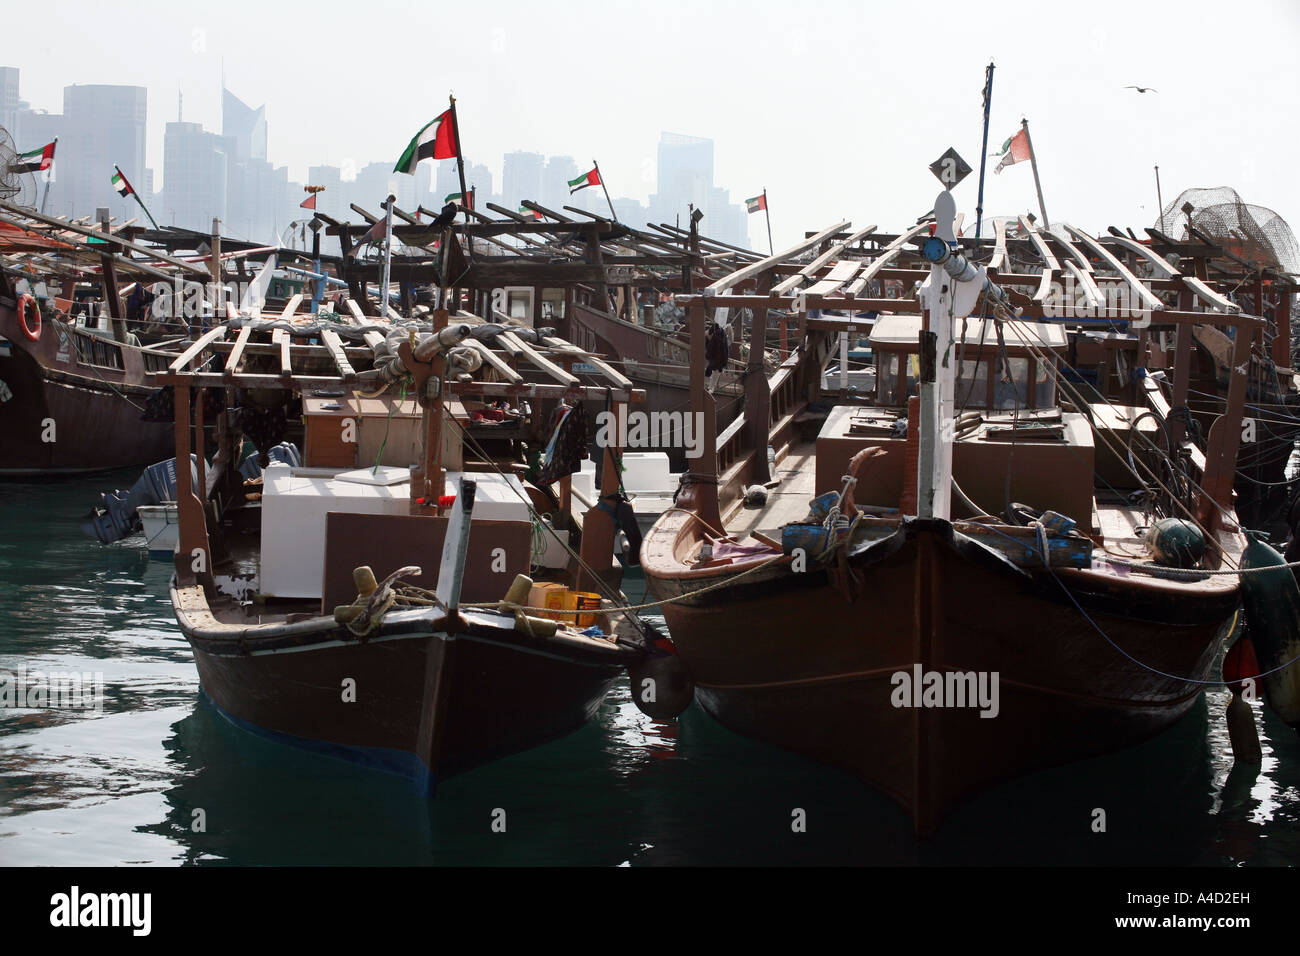 Dhows in the harbour against the modern city, Abu Dhabi, UAE Stock Photo